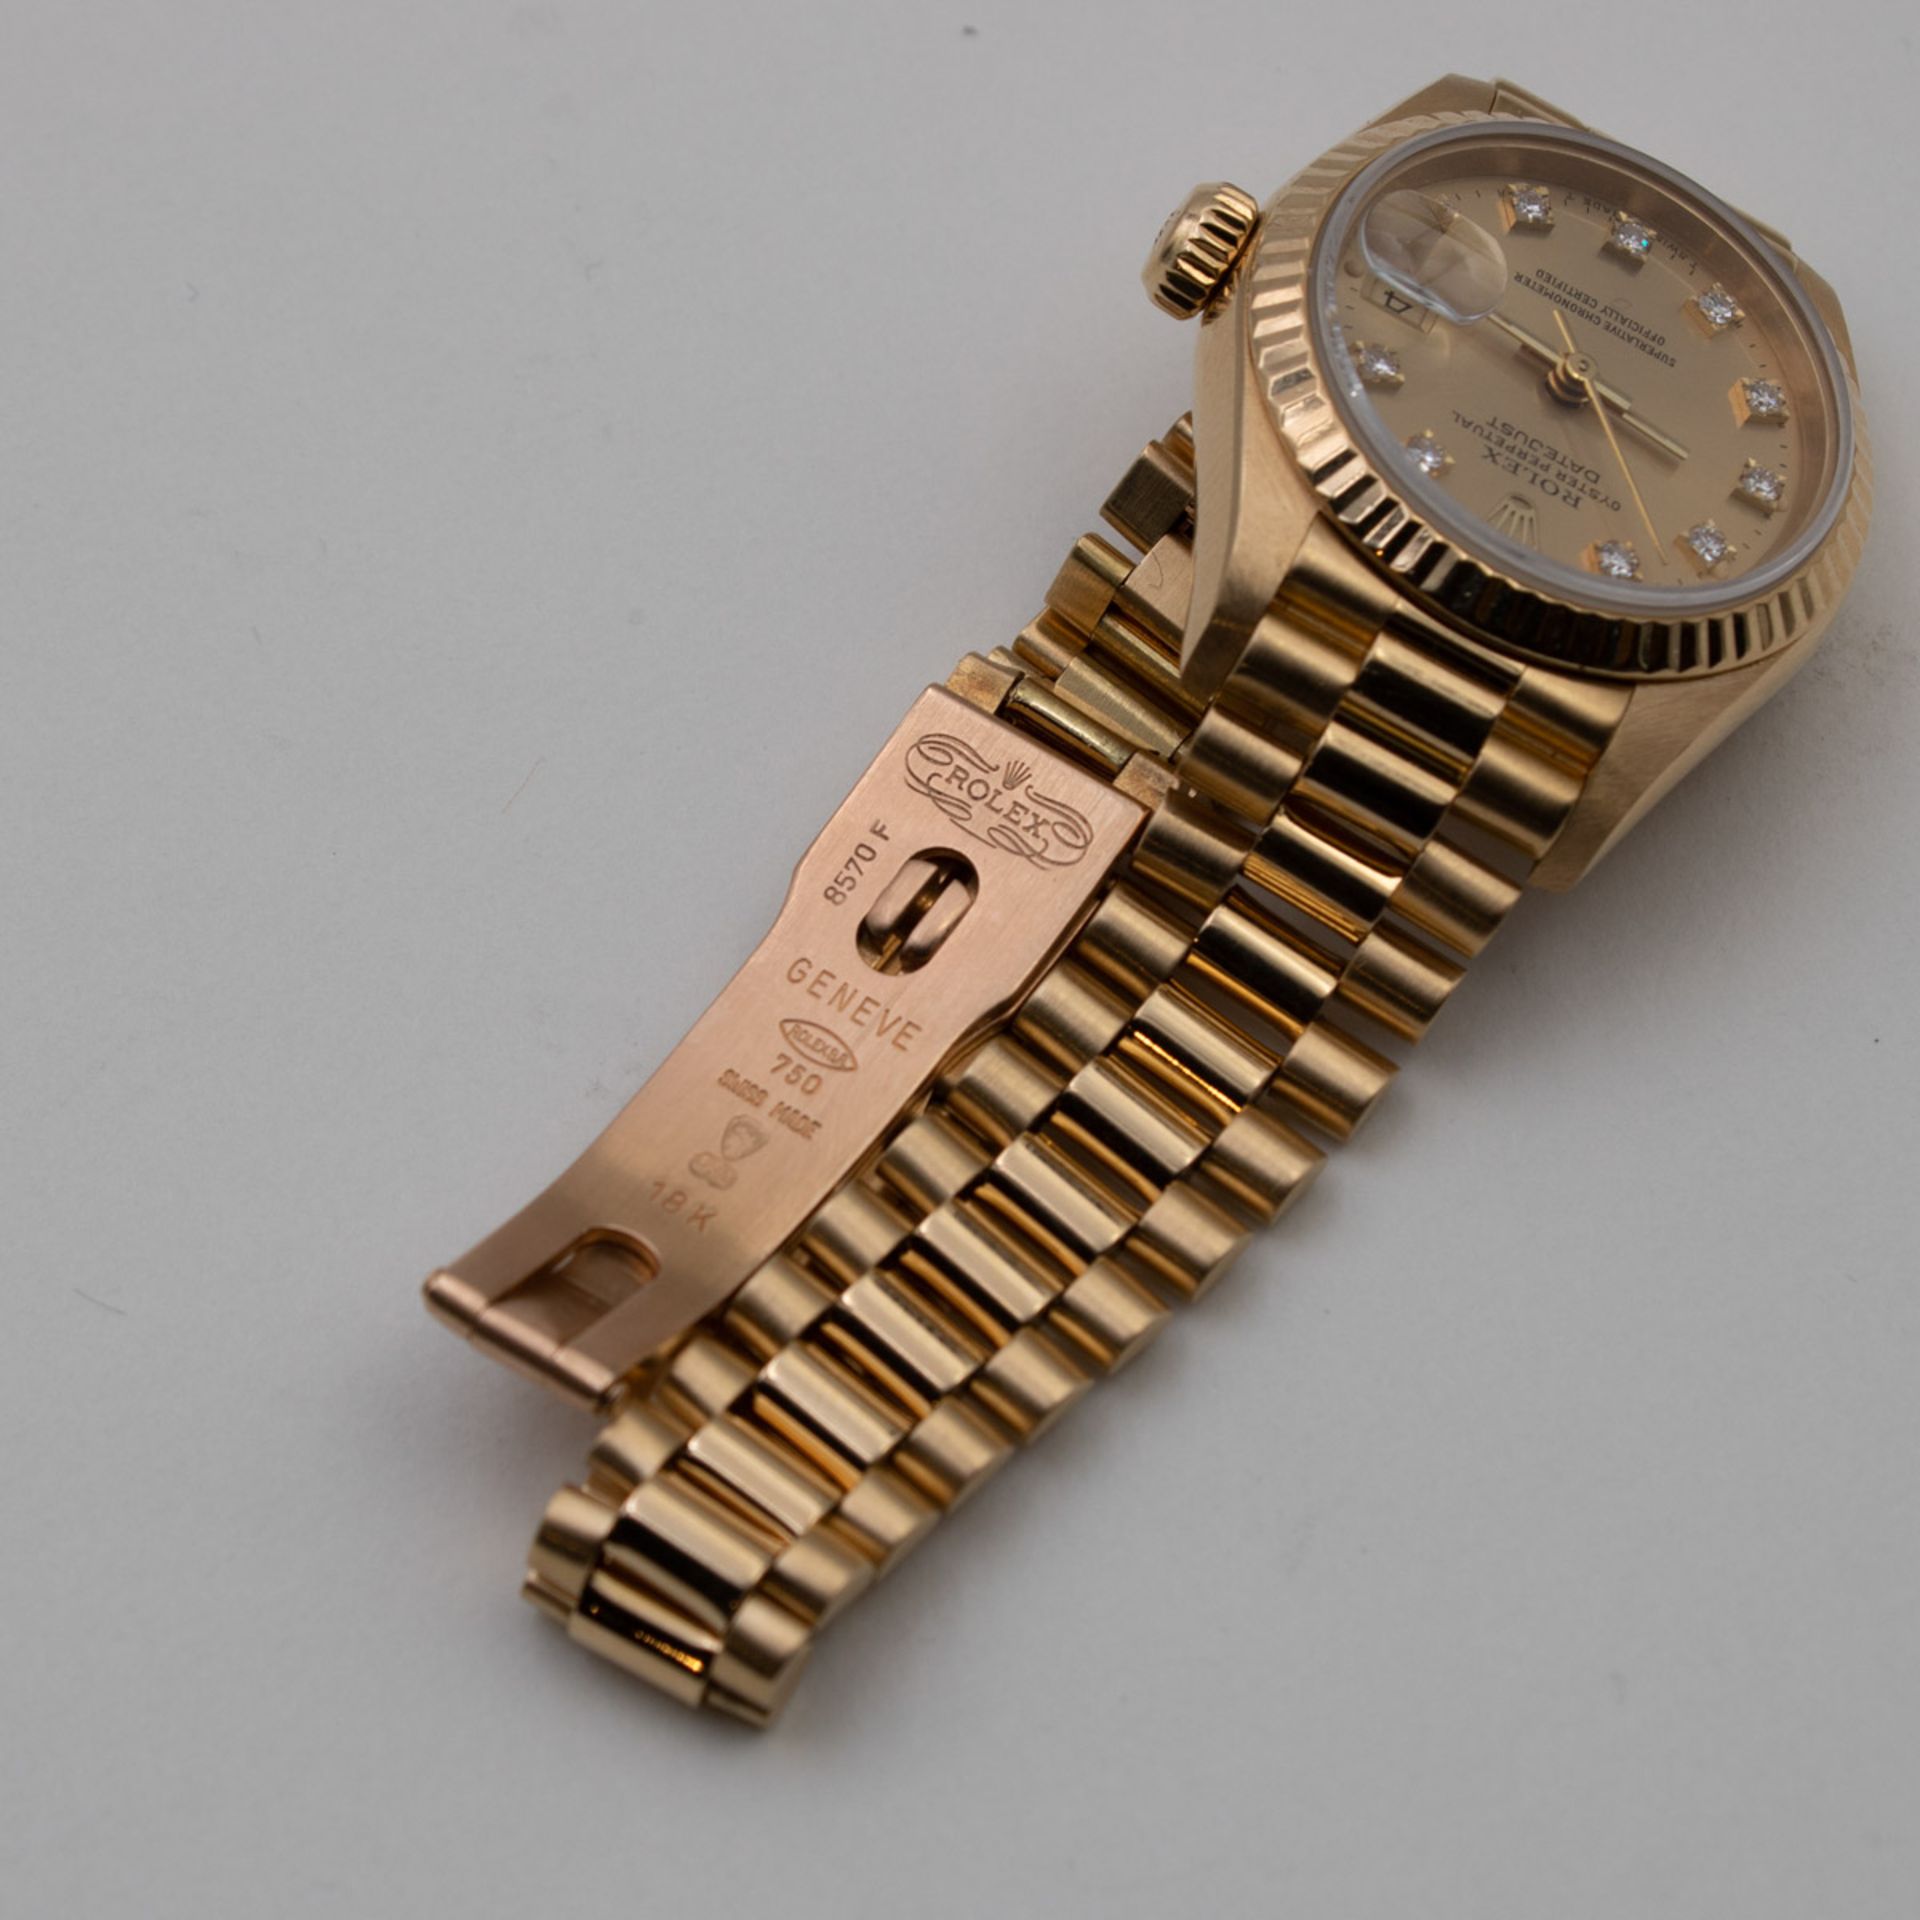 Rolex Oyster Perpetual Datejust ladies watch - Image 2 of 4